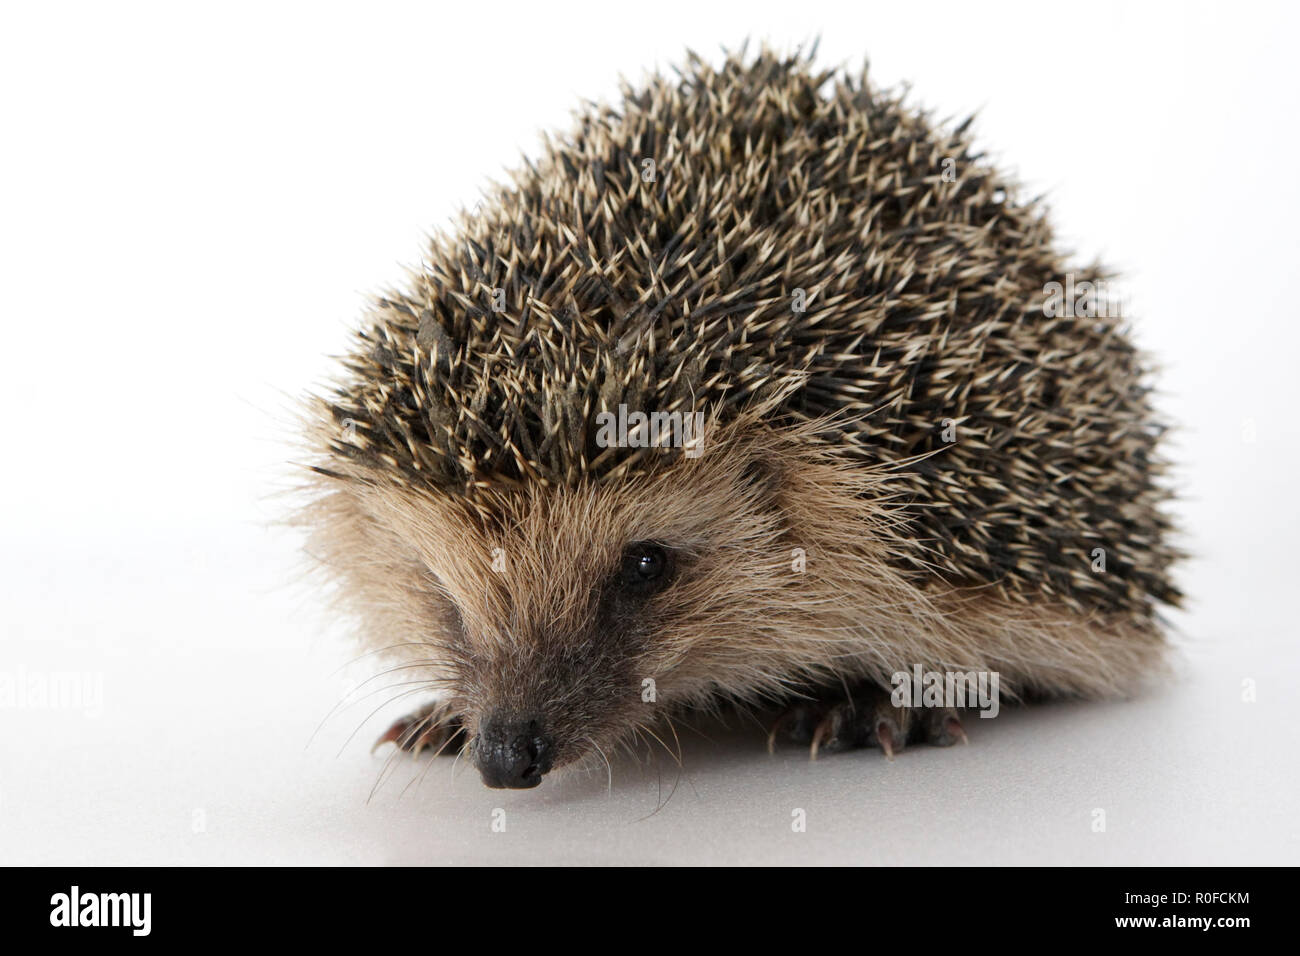 An hedgehog on white background Stock Photo